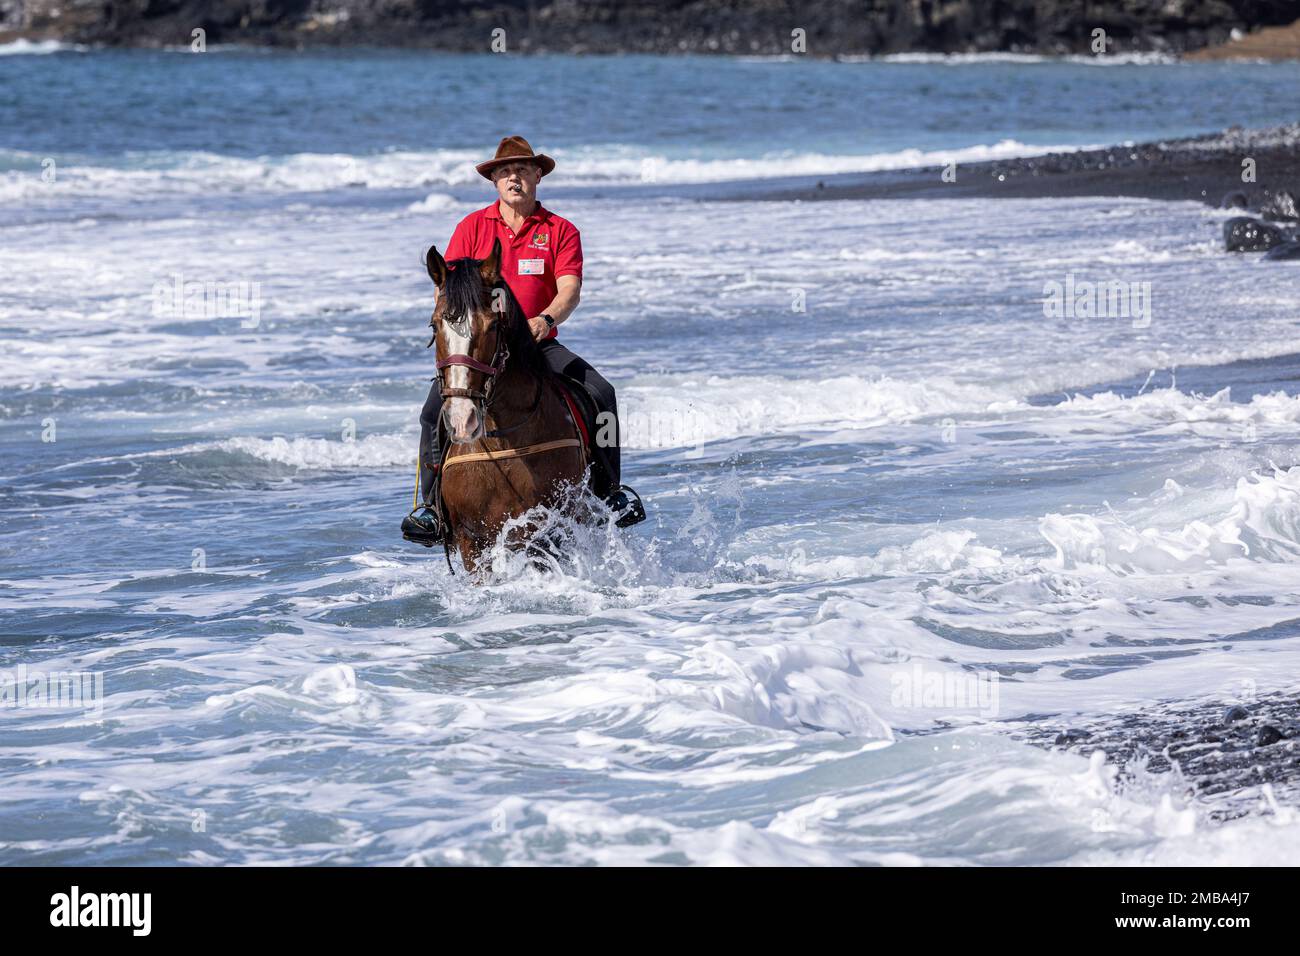 Costa Adeje, Tenerife, Canary Islands, 20 January 2023. Riders take their mounts into the sea at Playa Enramada beach during the fiesta of San Sebastian which returns for the first time since 2020 due to the covid pandemic restrictions. The annual fiesta in La Caleta on the Costa Adeje is enjoyed by locals and tourists who gather to see the many horses that come to bathe in the sea at the Playa Enramada beach. Credit: Phil Crean A/Alamy Live News Stock Photo